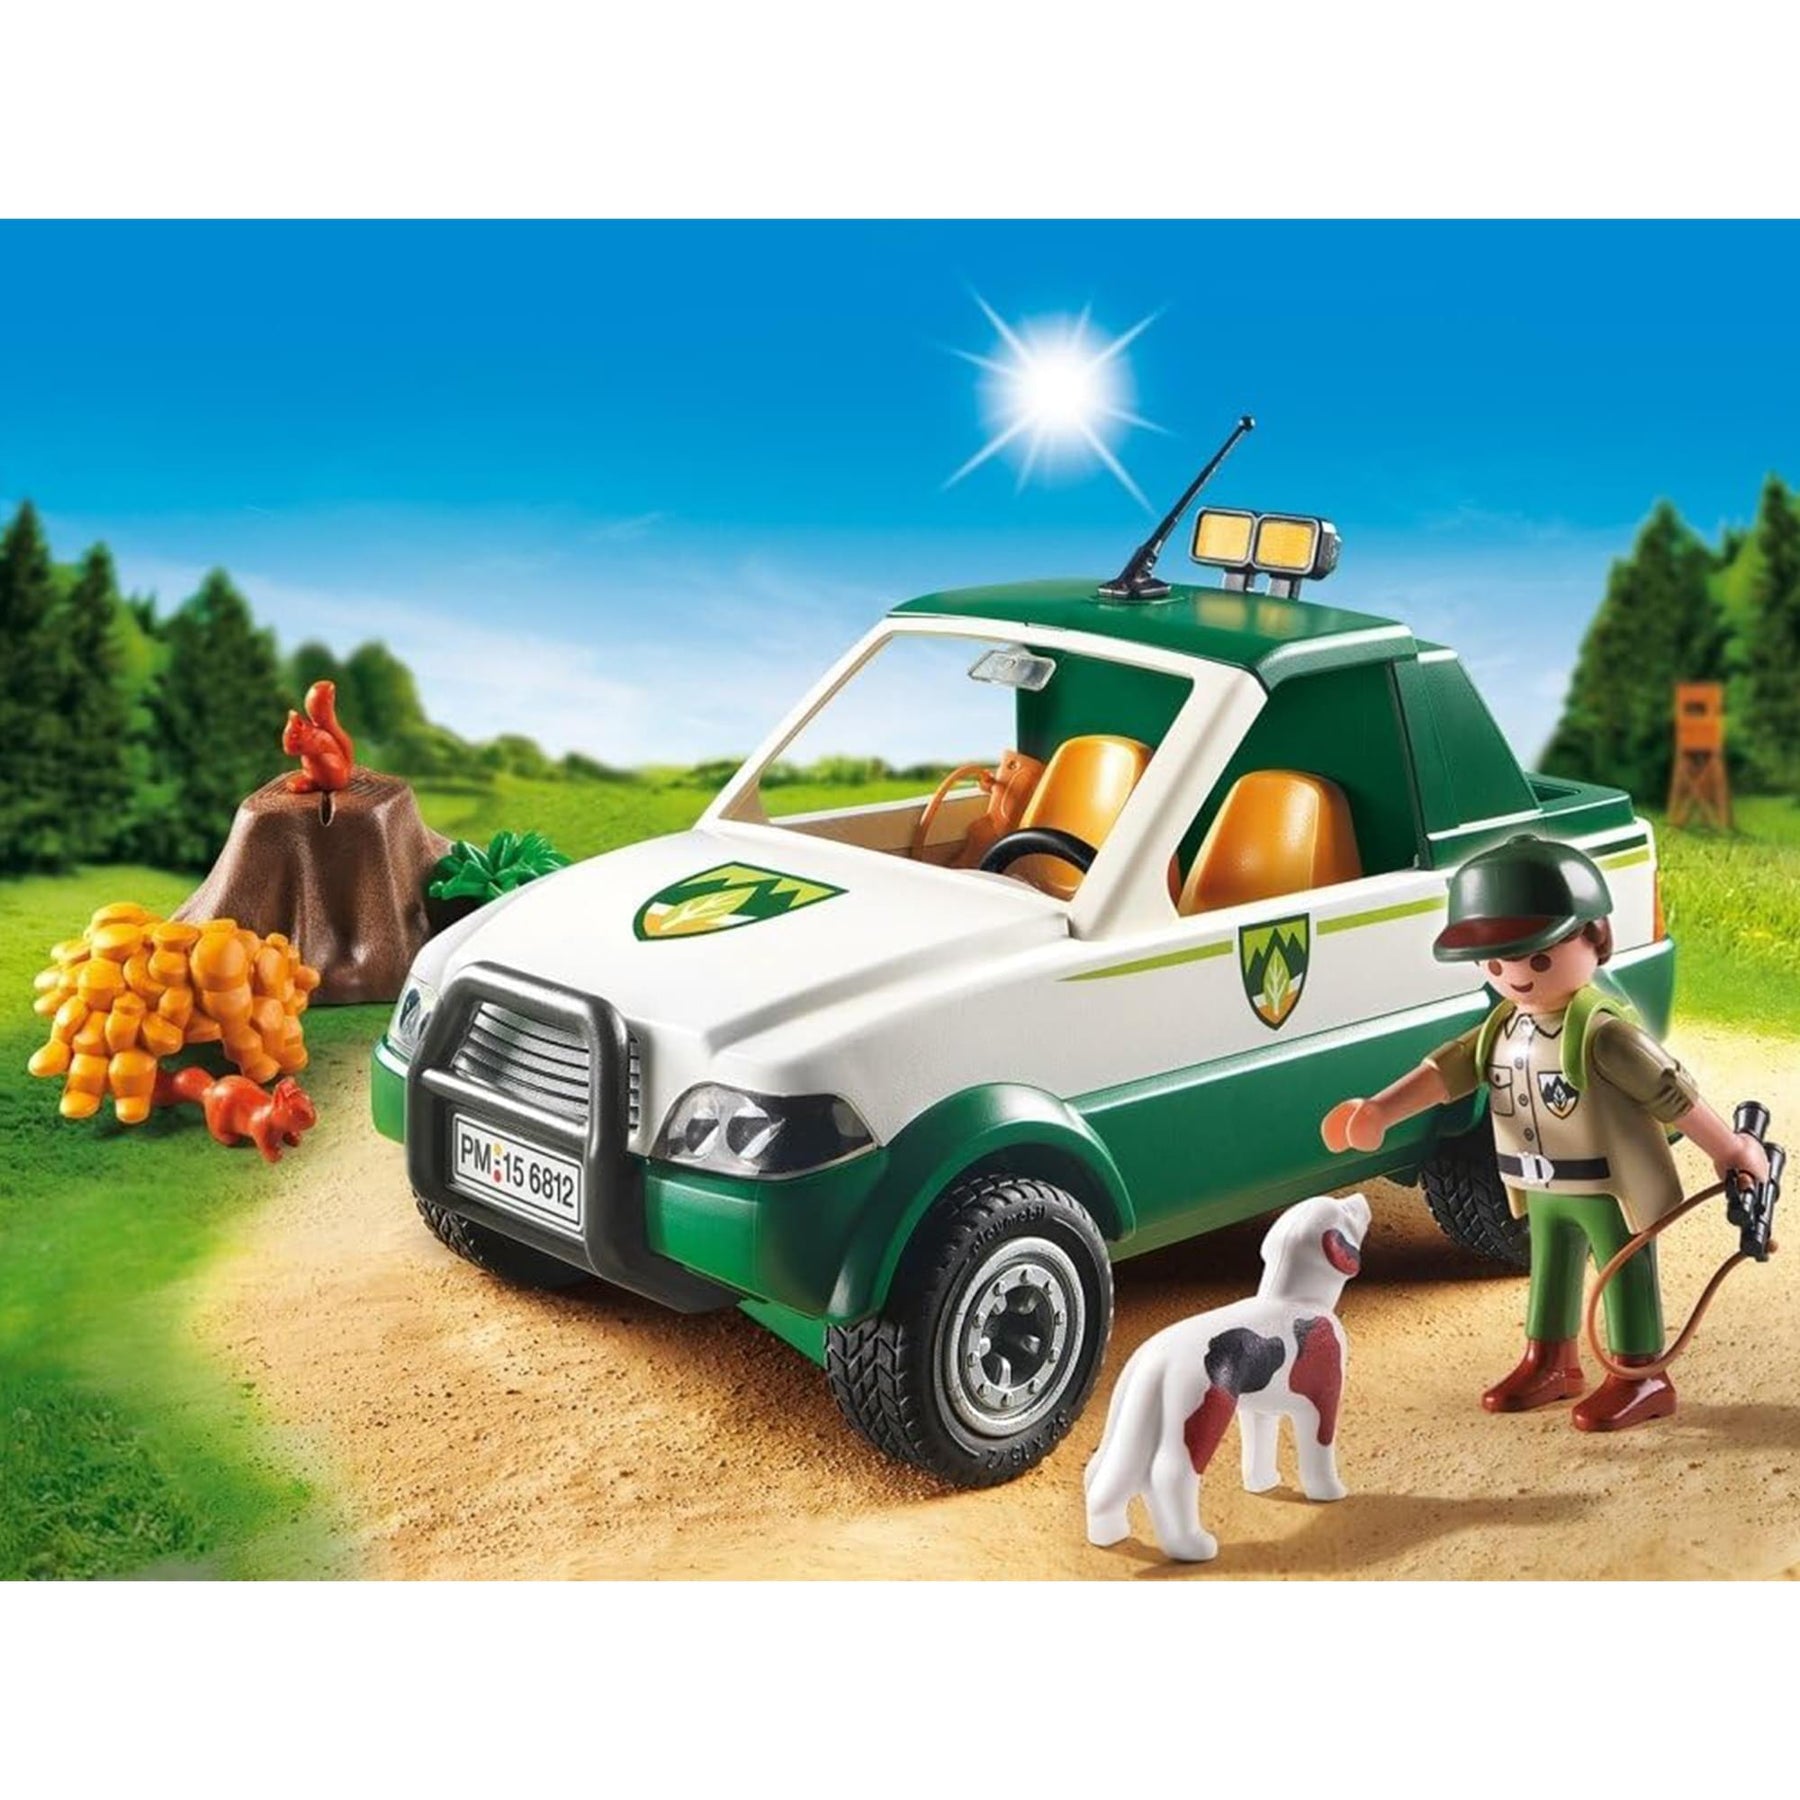 Playmobil 6812 Country Forest Ranger Pick Up Truck Building Set